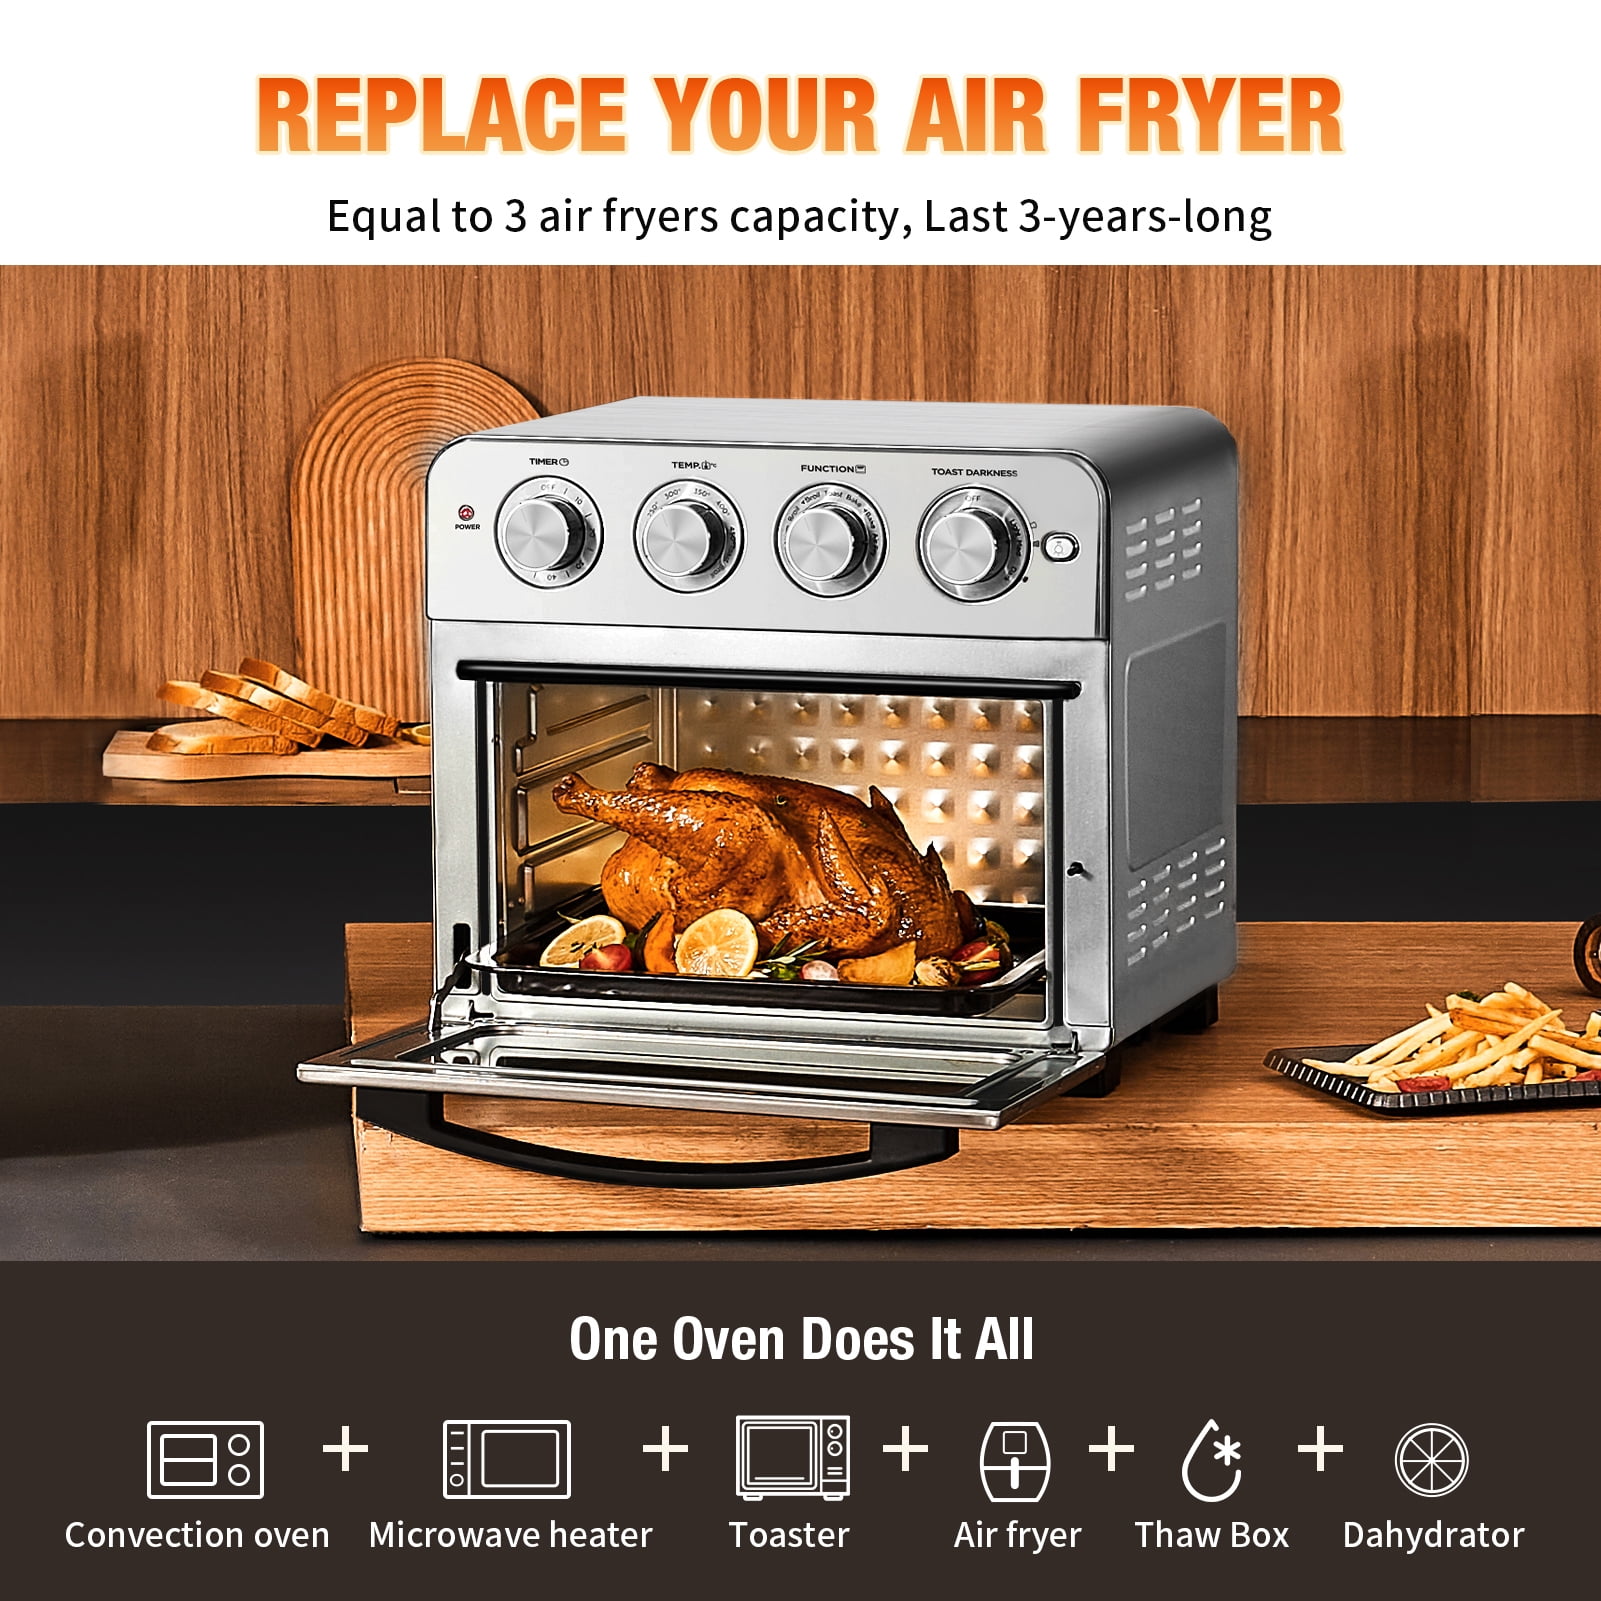 20 Quart Air Fryer, 5-in-1 Air Fryer Oven Toaster Combo with Accessories &  E-Recipes, Convection Oven Countertop, 5 presets for Quick, Easy  Family-Sized Meals, UL Certified, 1300W, Gray 